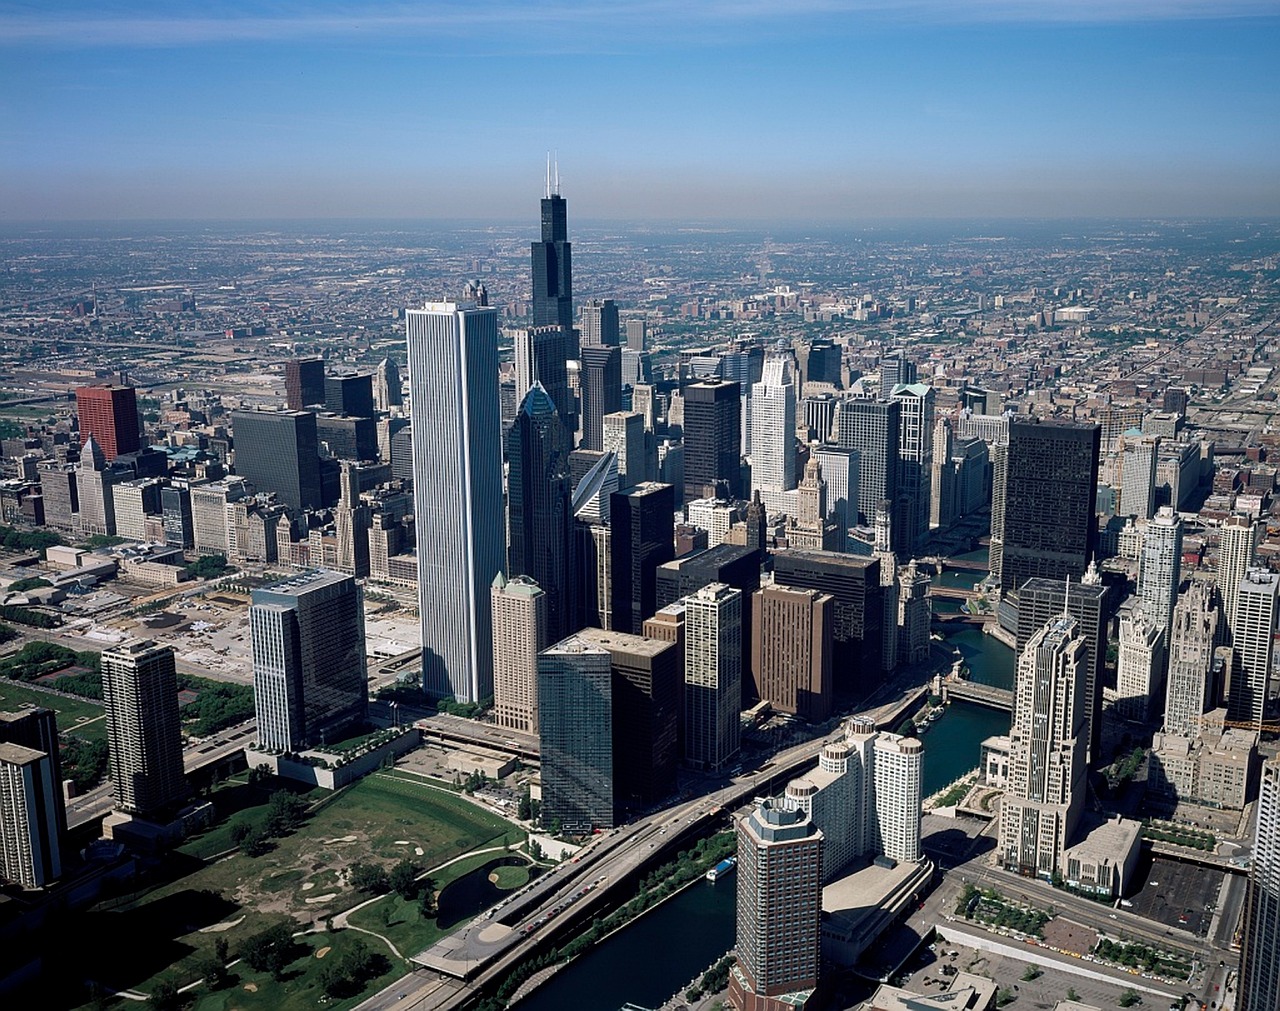 a view of a city with lots of tall buildings, a photo, flickr, illinois, award-winning”, 1 9 9 8 photo, wallpaper”